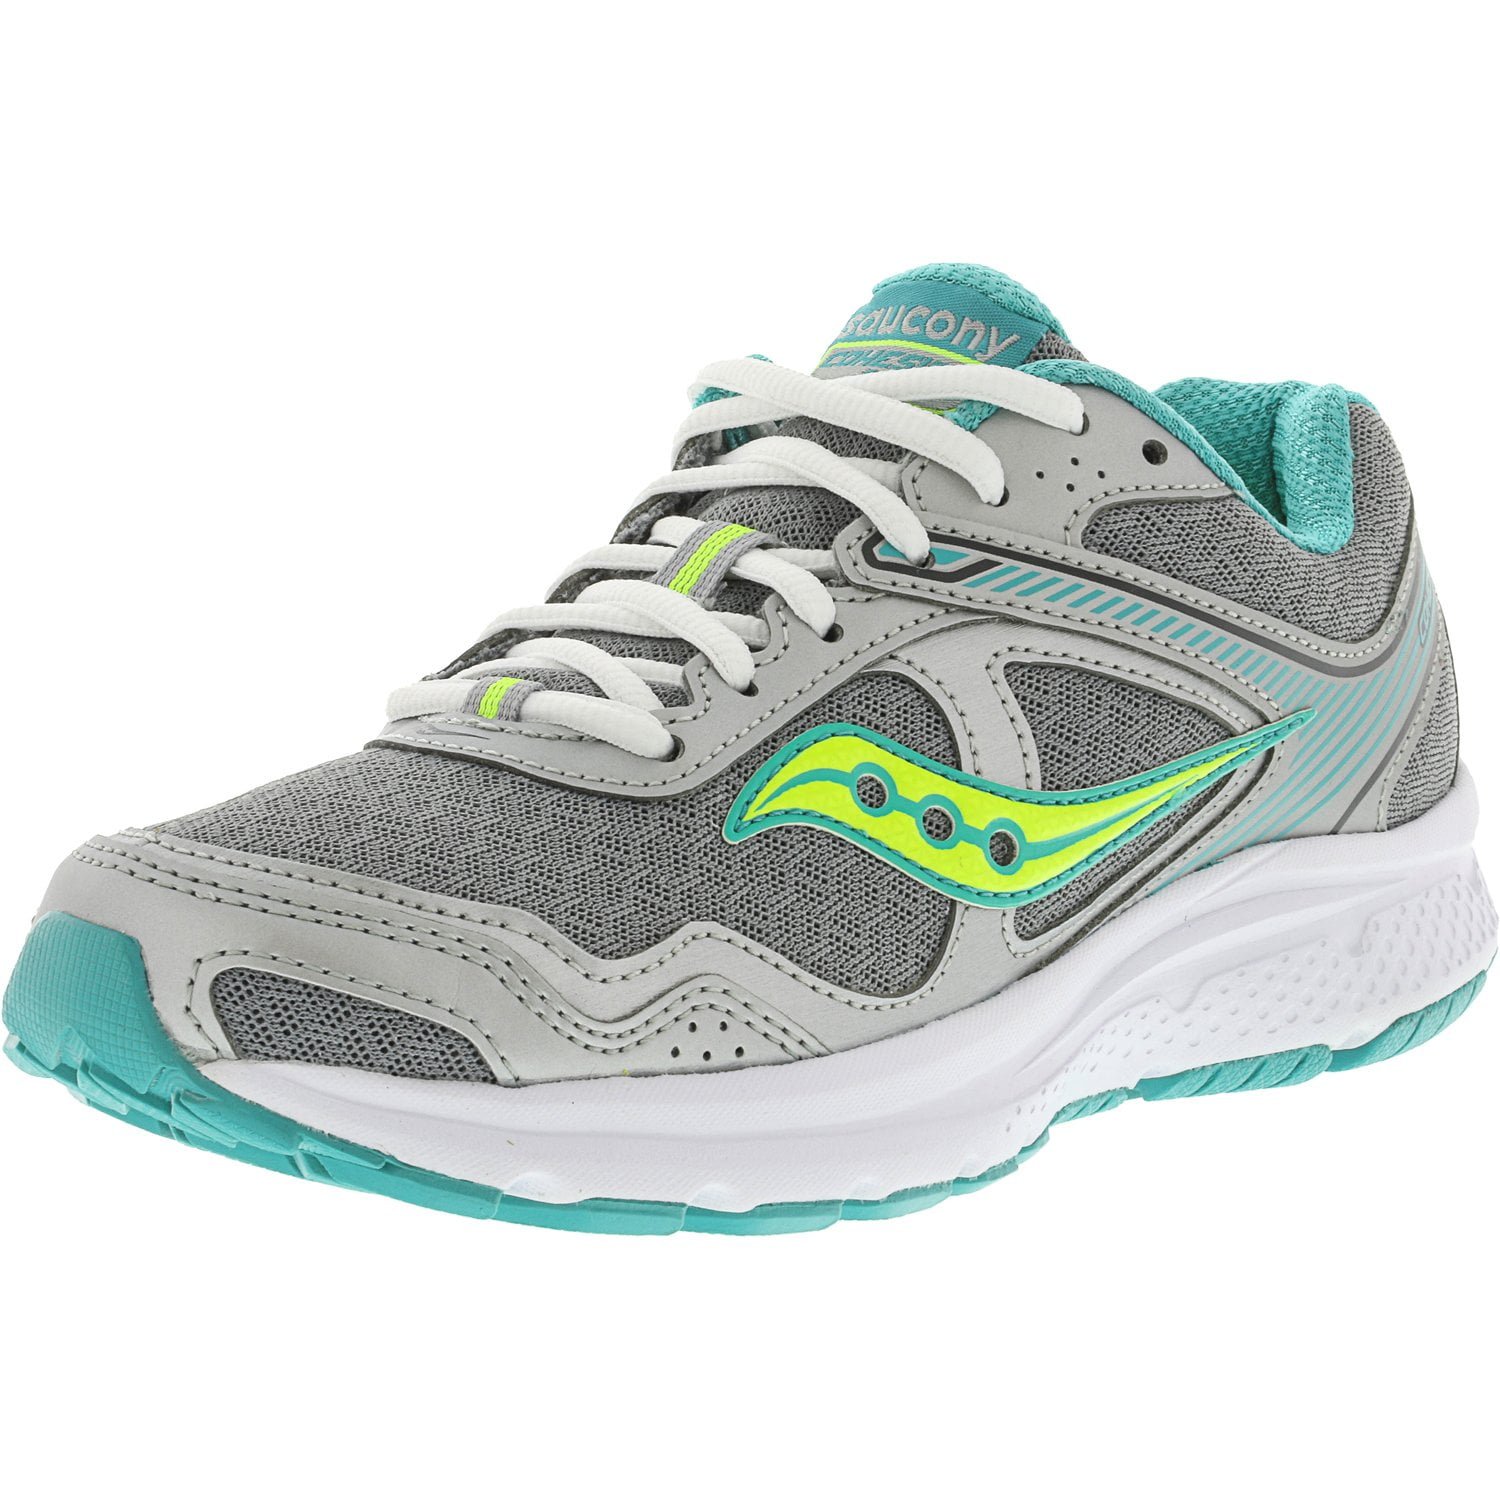 saucony women's grid cohesion nx running shoe